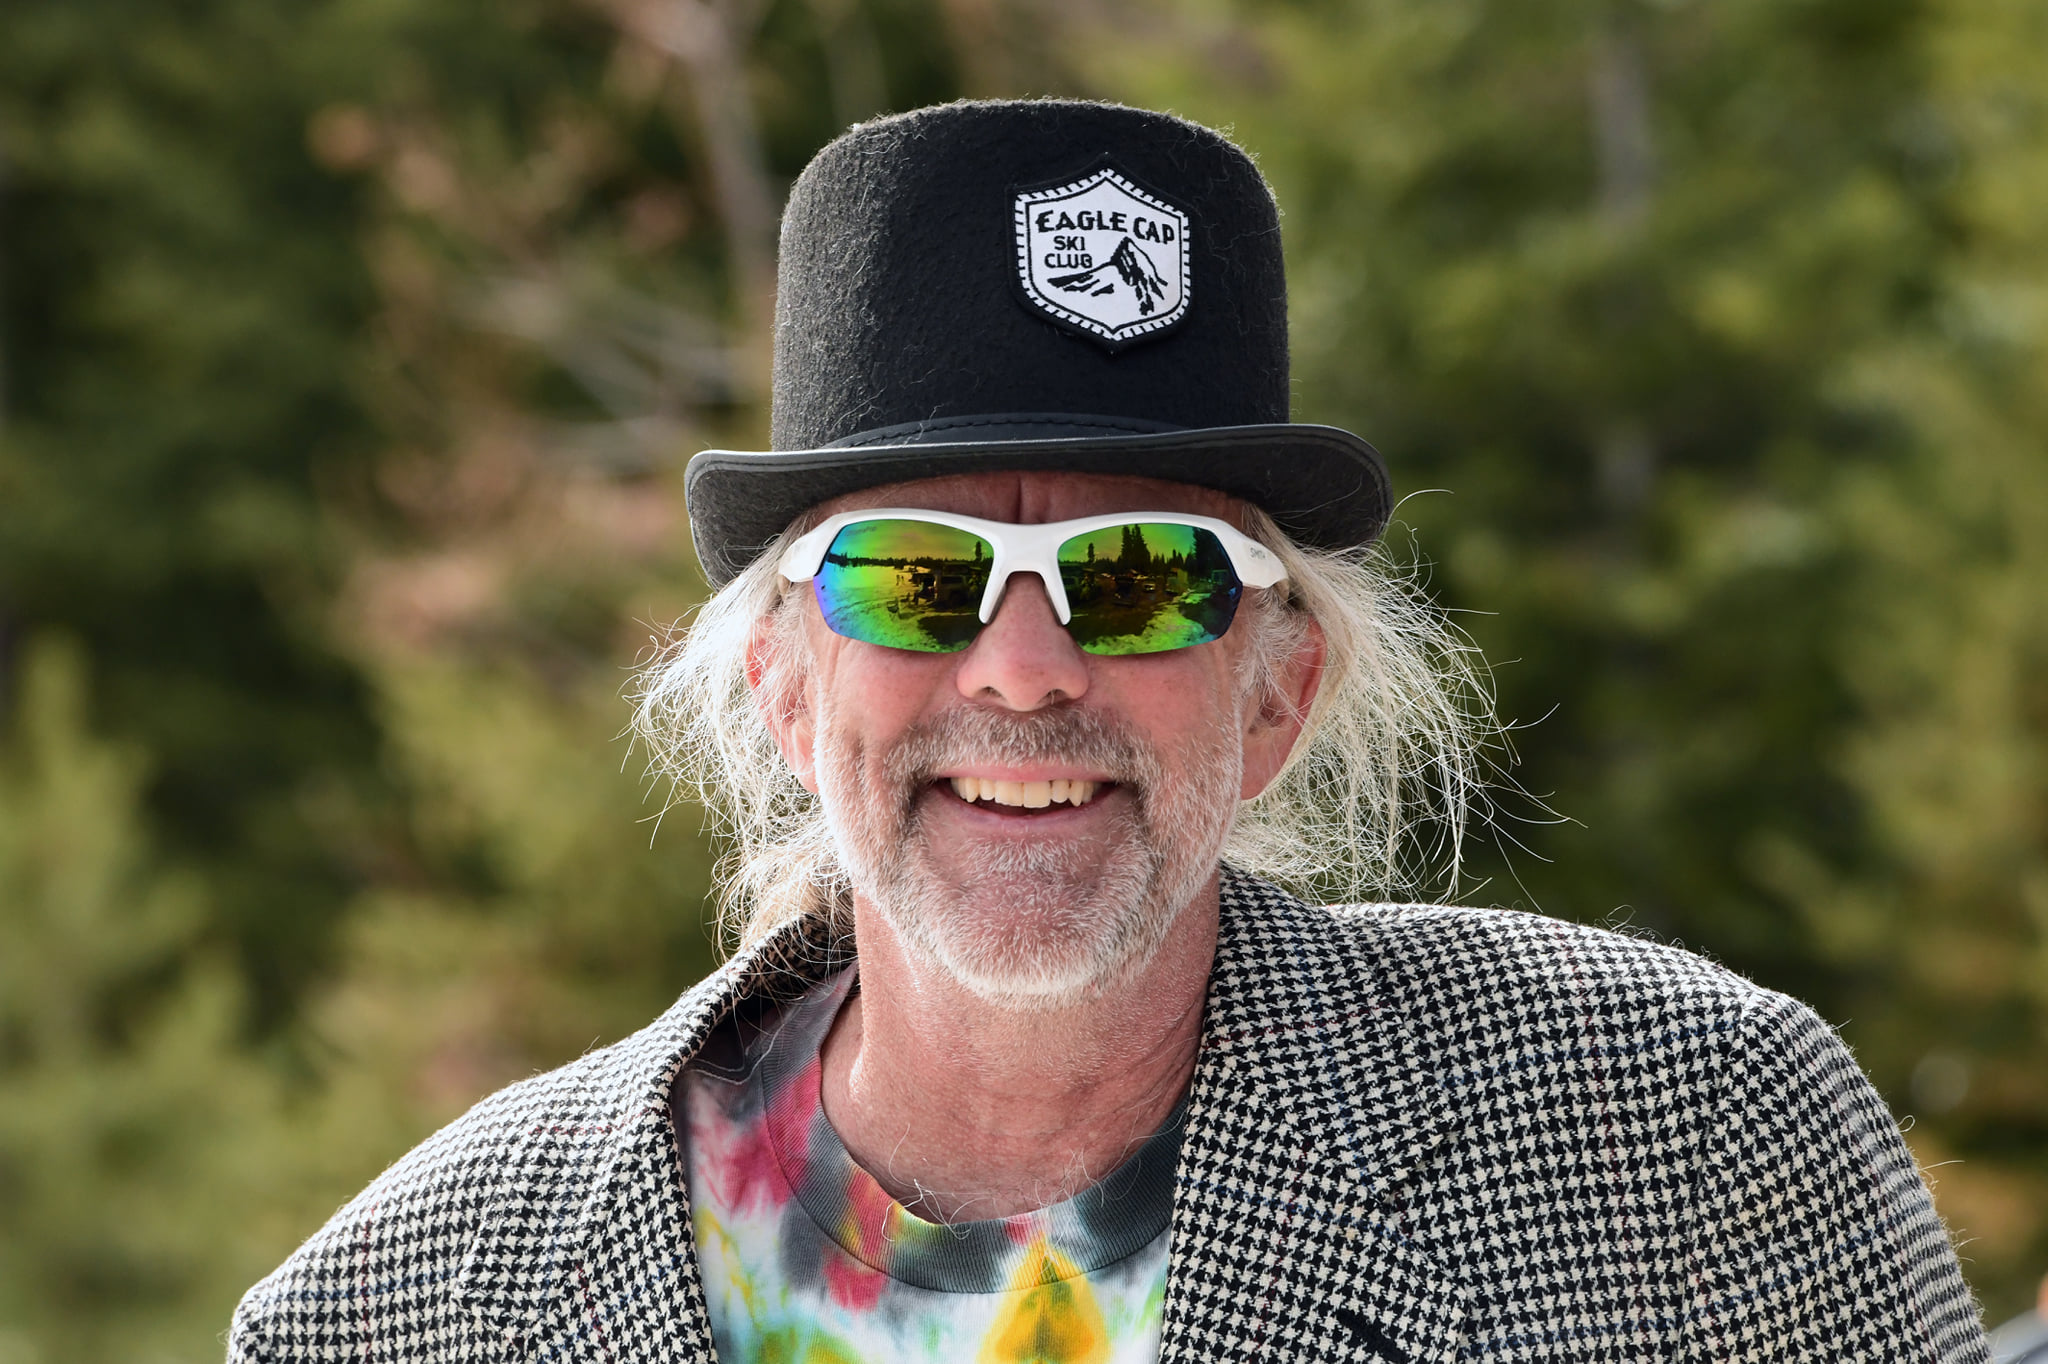 Jerry with his eagle cap ski club hat